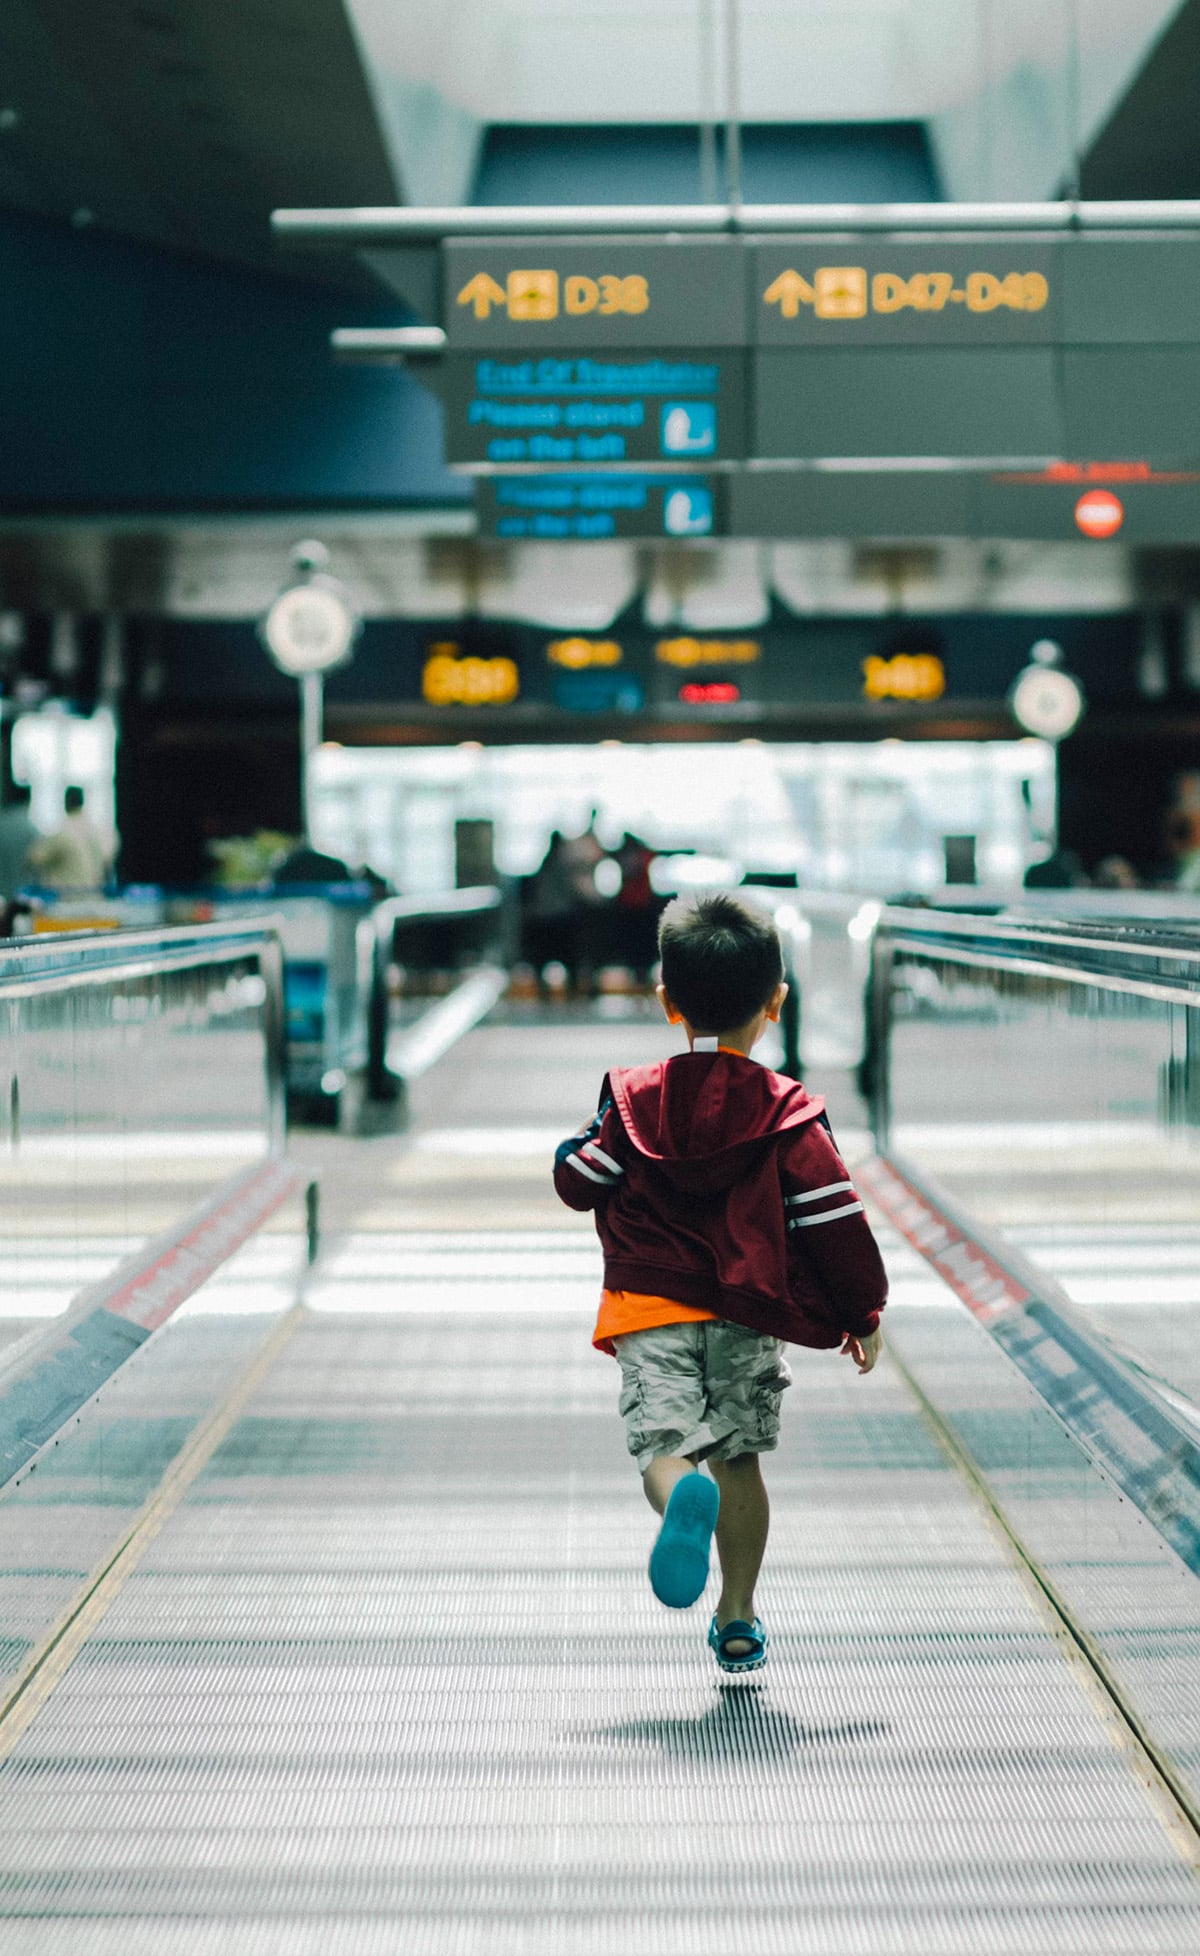 A young boy energetically running through the airport terminal, capturing a moment of excitement or haste.